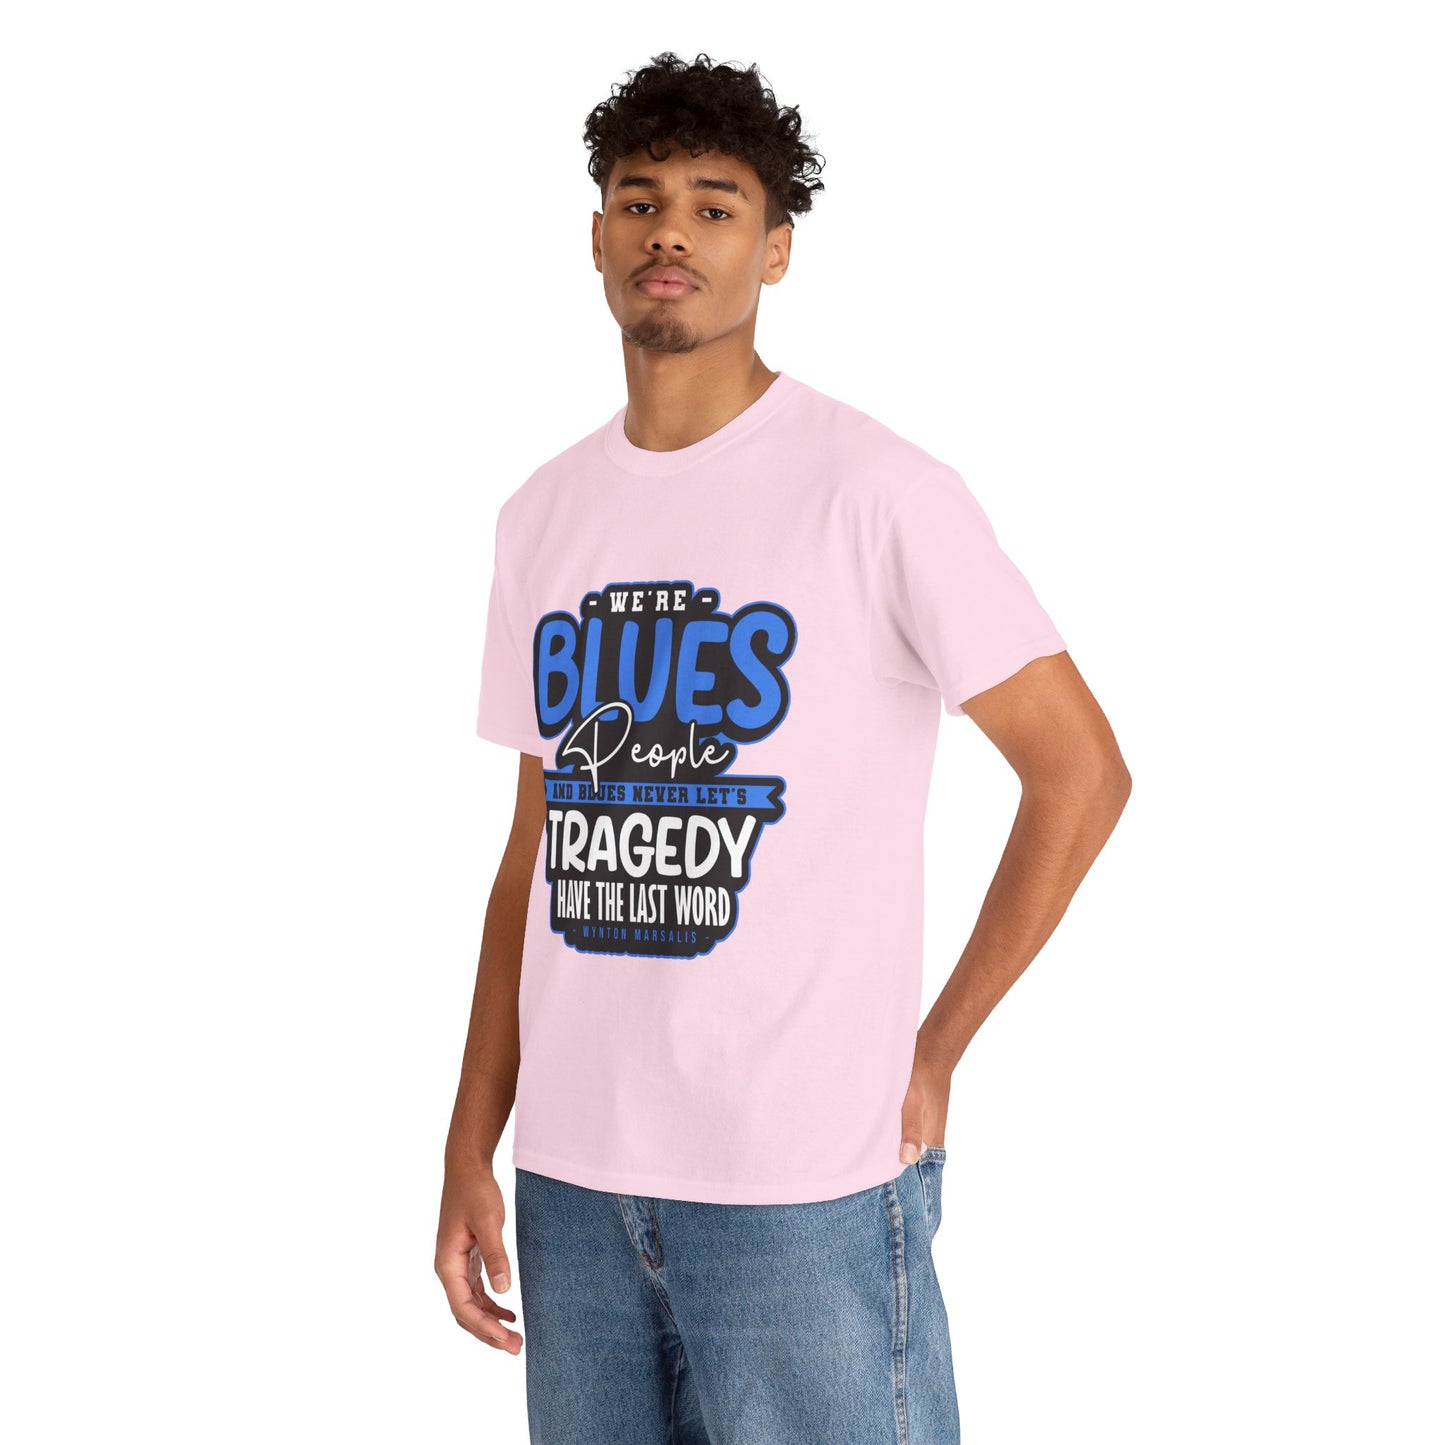 The Curious Mind T-Shirt: We're blues people